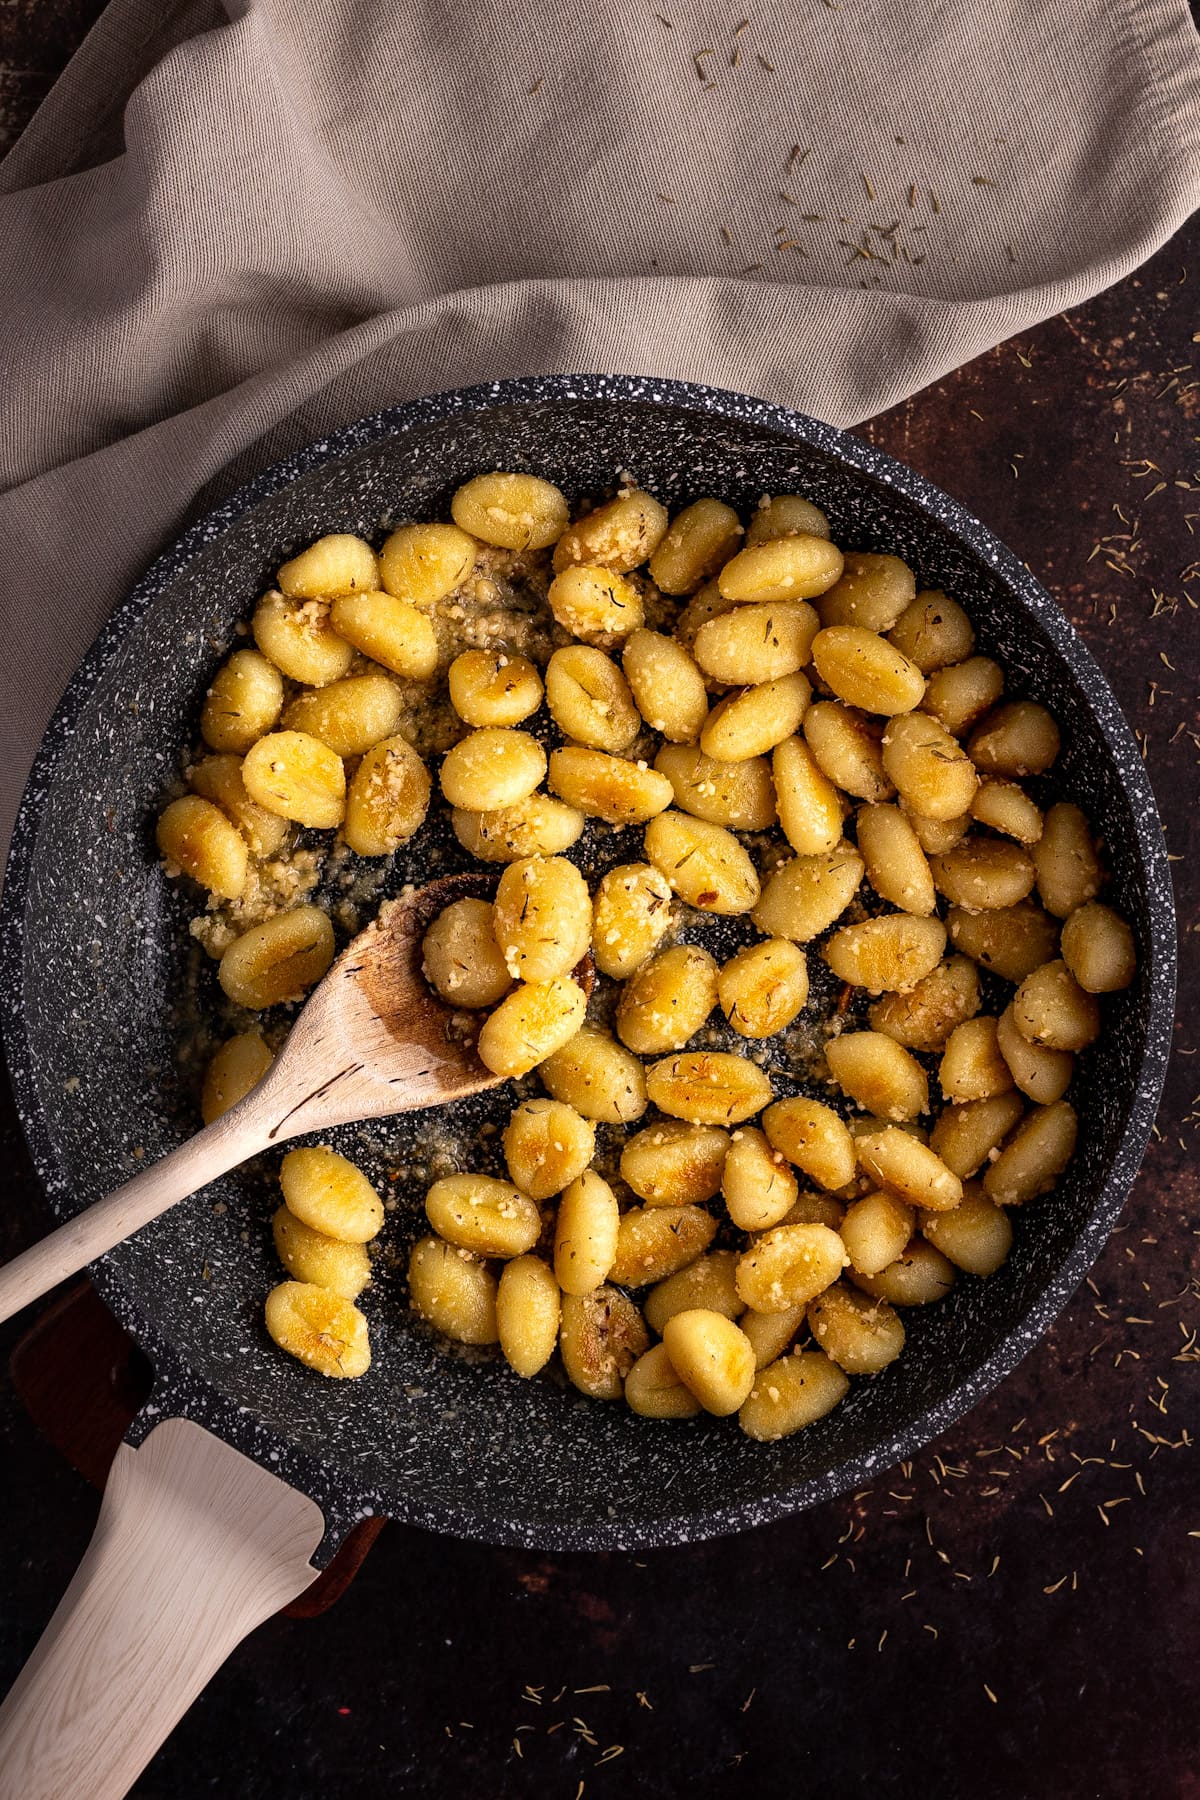 Overhead view of a pan filled with fried gnocchi, on a dark brown table.